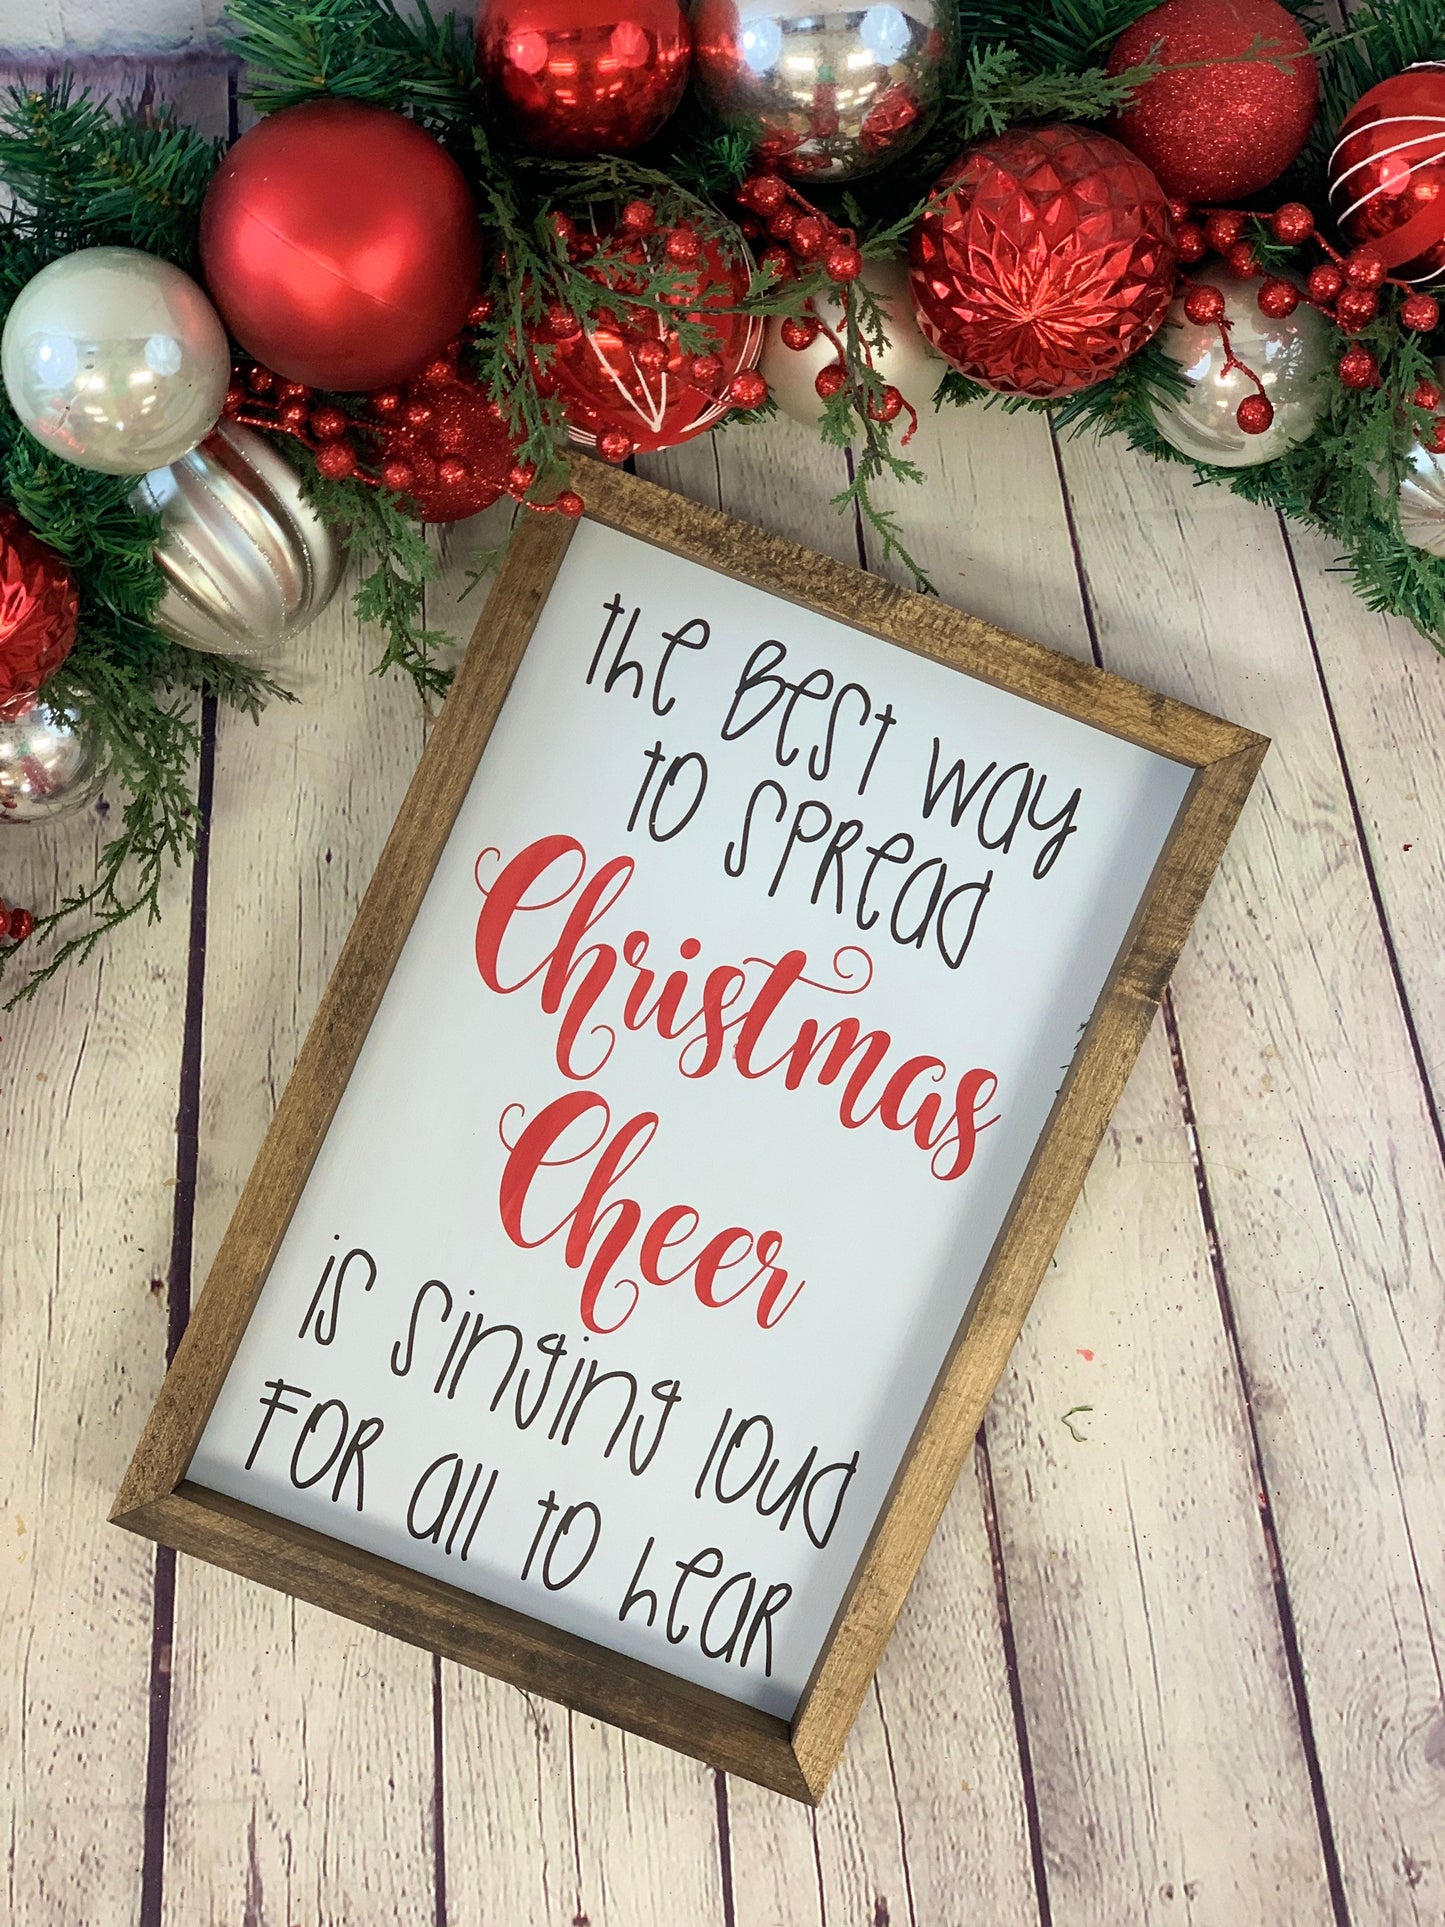 The Best Way to Spread Christmas Cheer | Elf Movie Quotes | Elf Signs | Christmas Decor | Christmas Signs